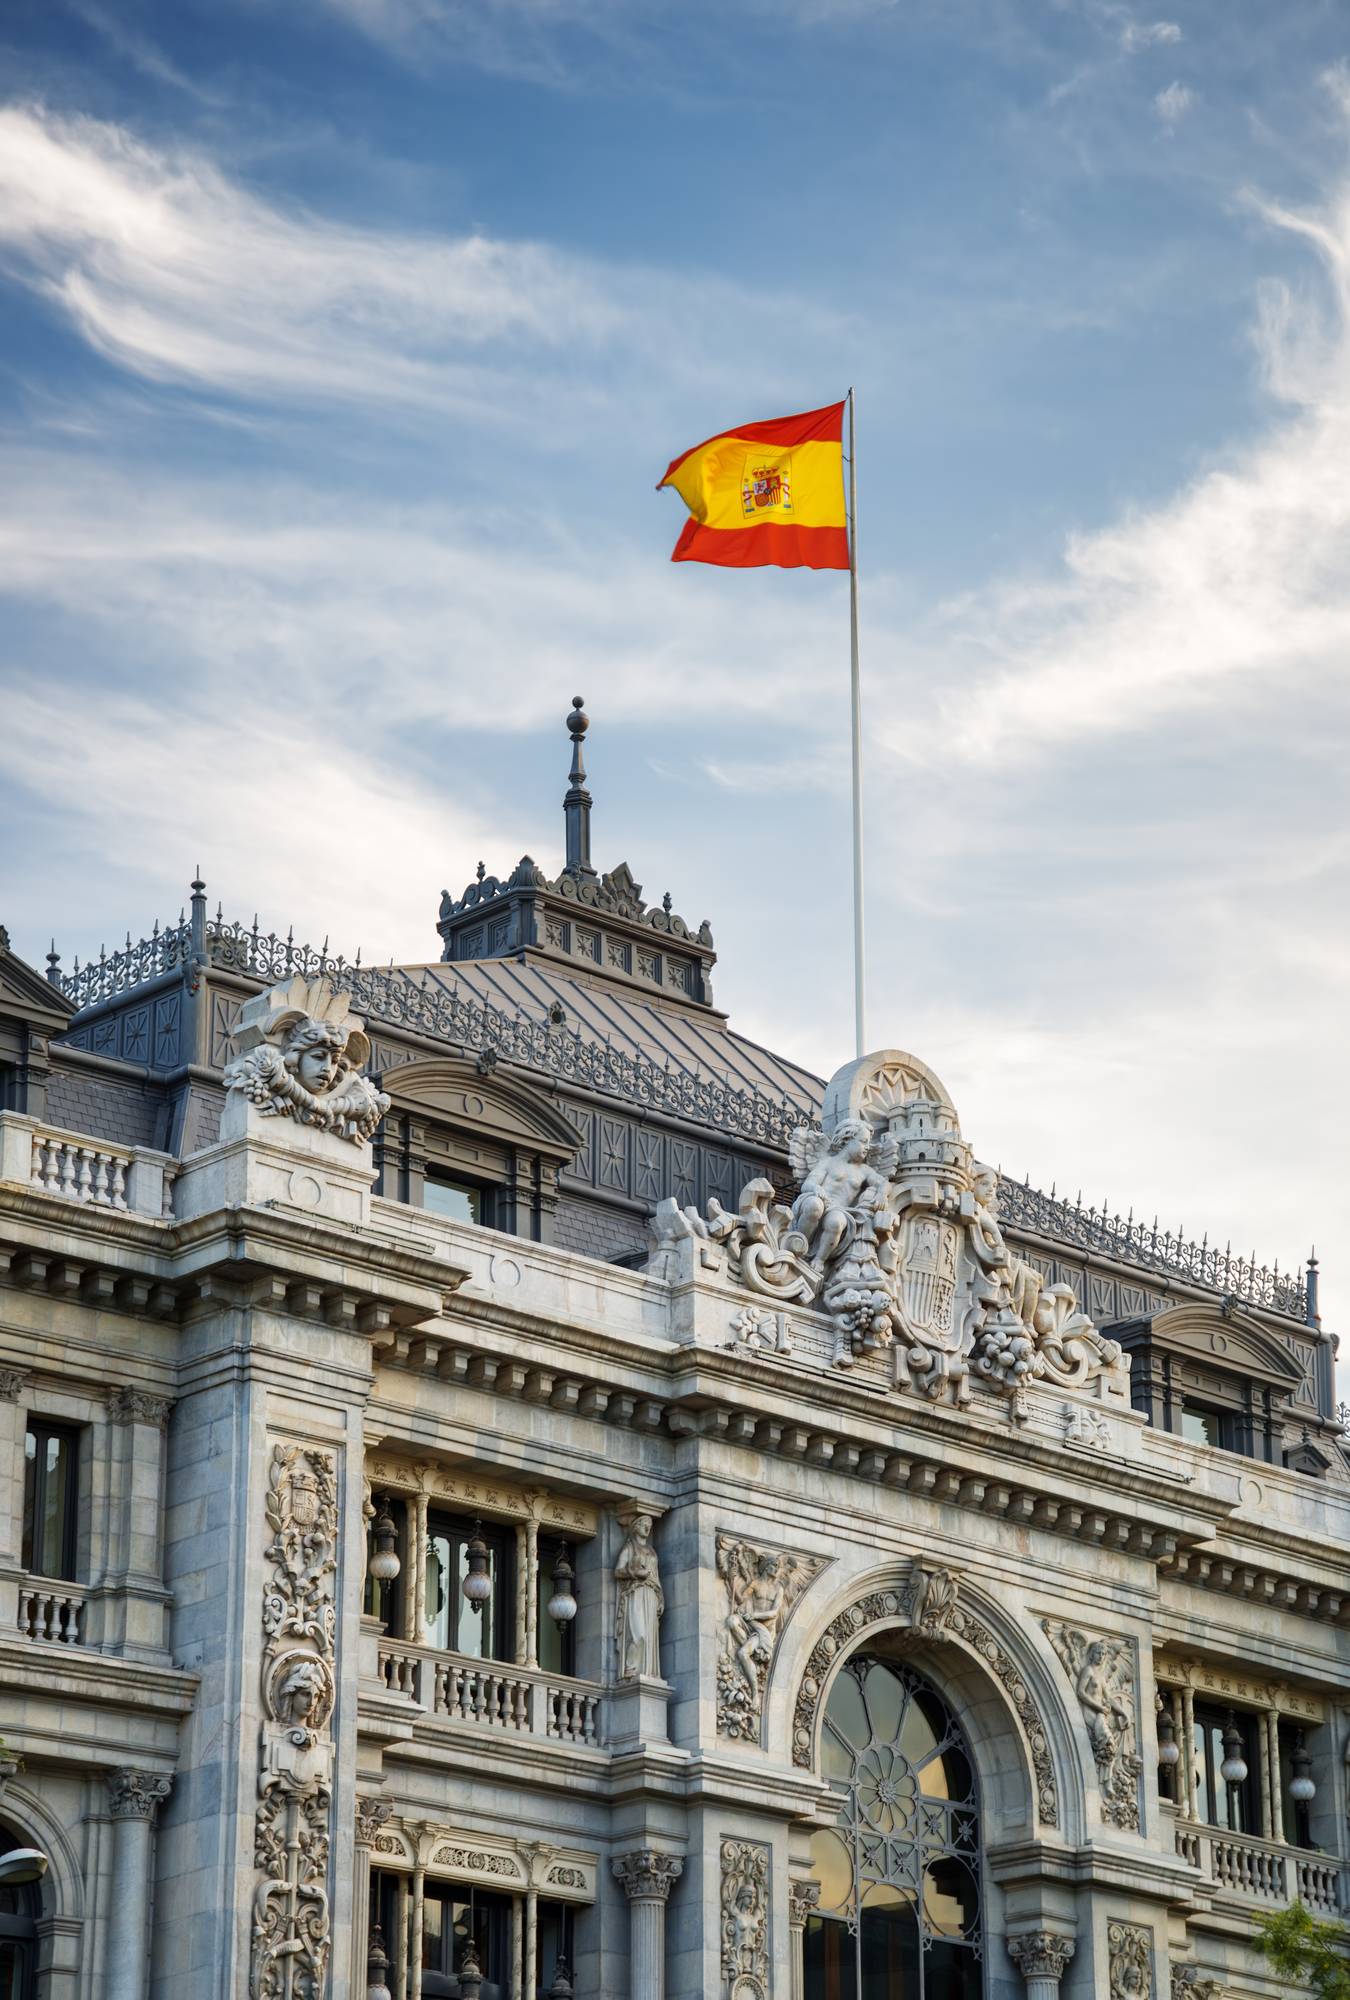 The flag of Spain fluttering on building of the Bank of Spain (Banco de Espana) in Madrid, Spain. Madrid is a popular tourist destination of Europe.